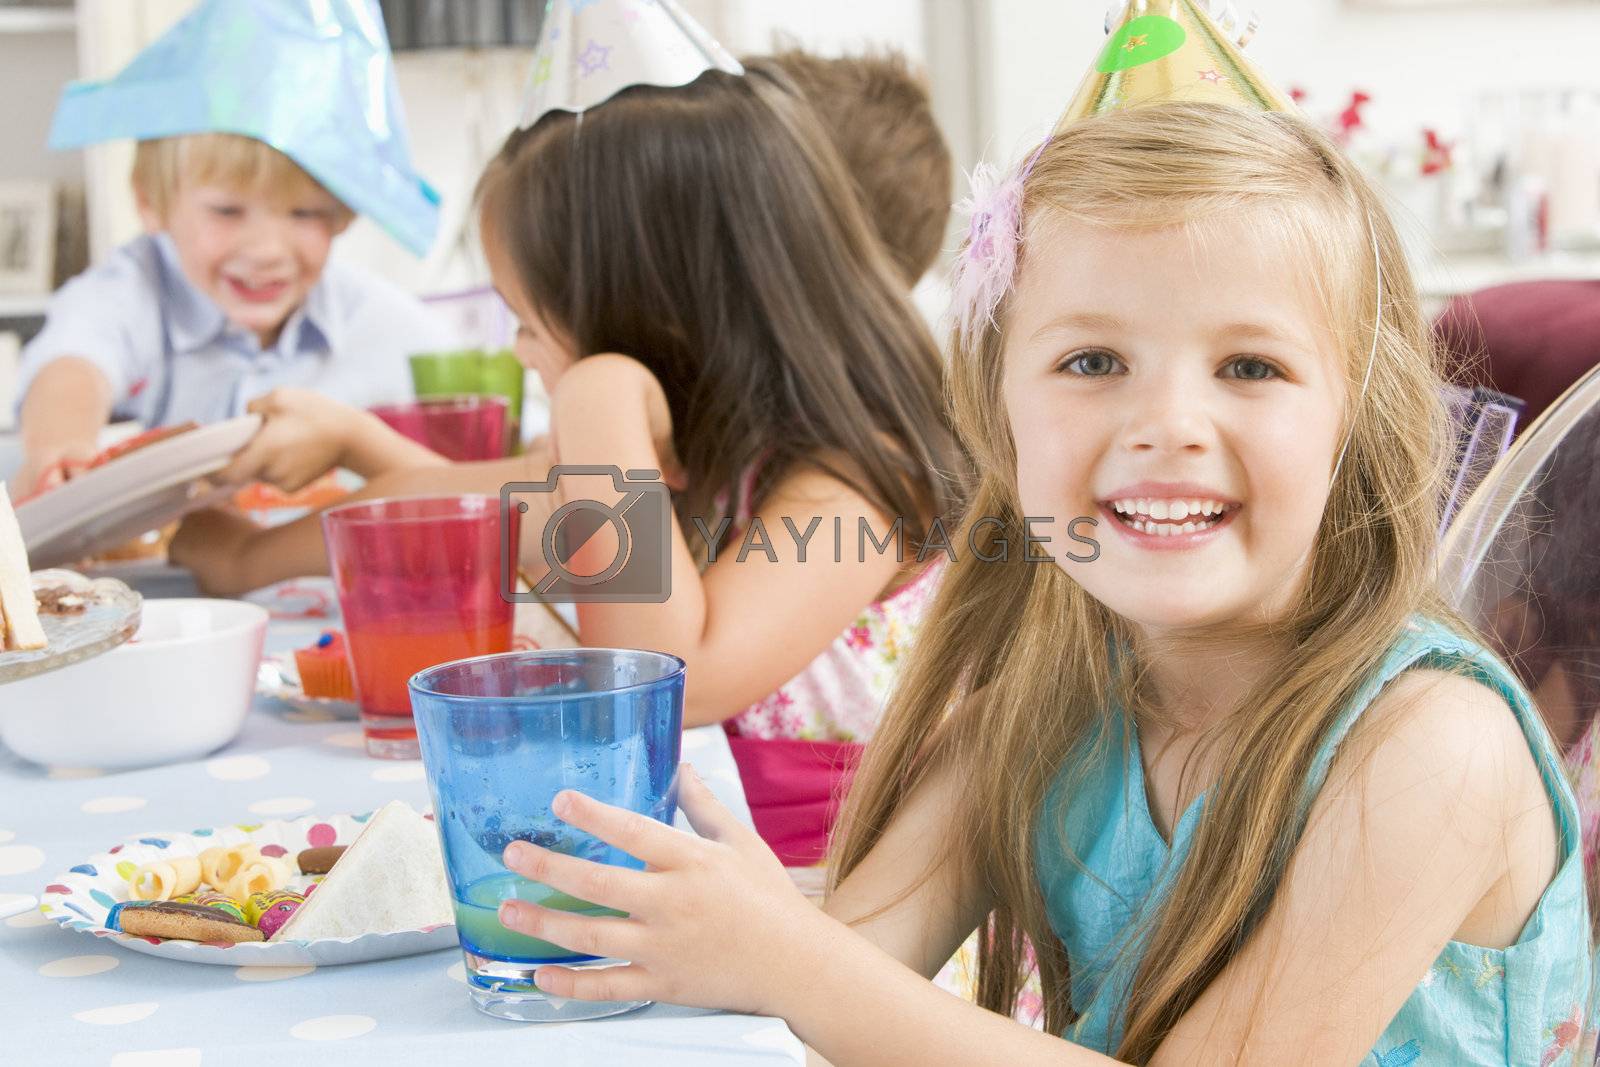 Royalty free image of Young girl at party sitting at table with food smiling by MonkeyBusiness